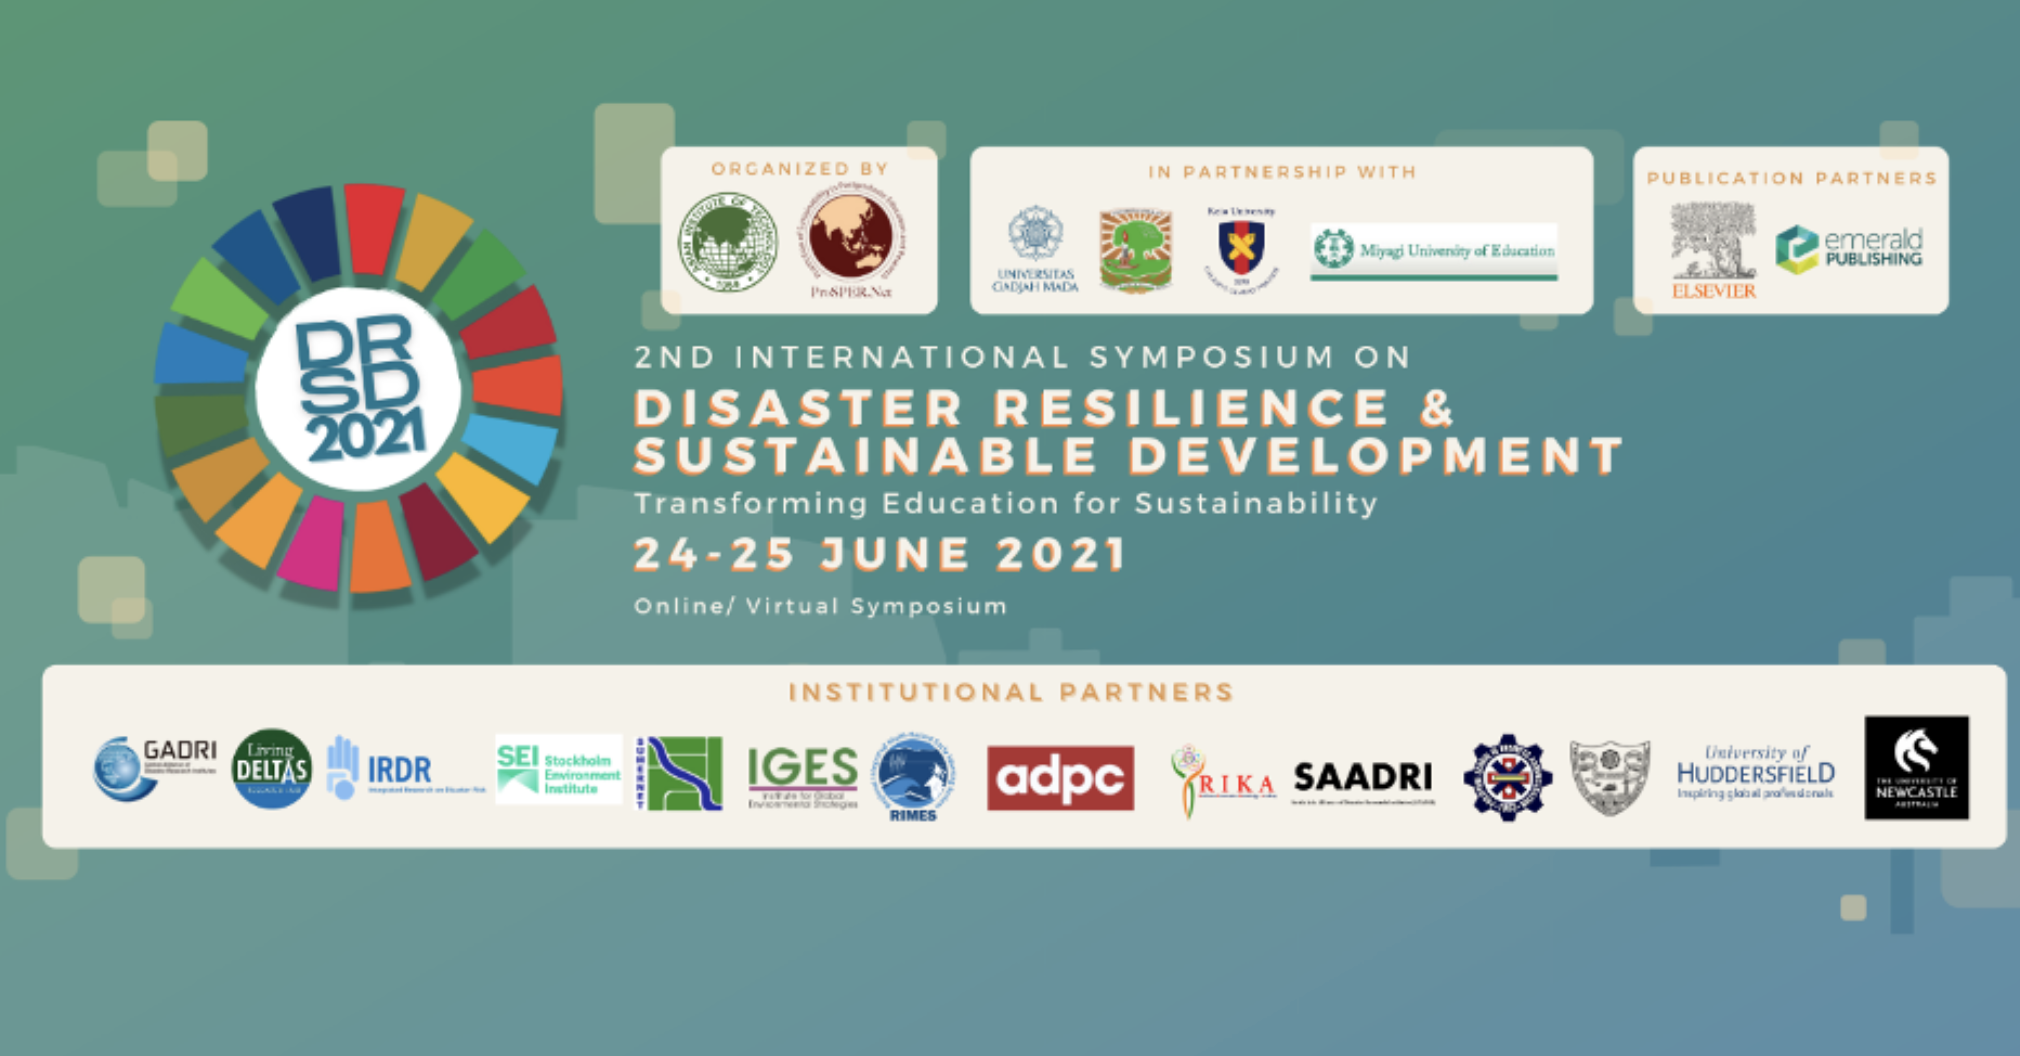 Multi-Hazard Resilience and Sustainability prioritized at DRSD 2021